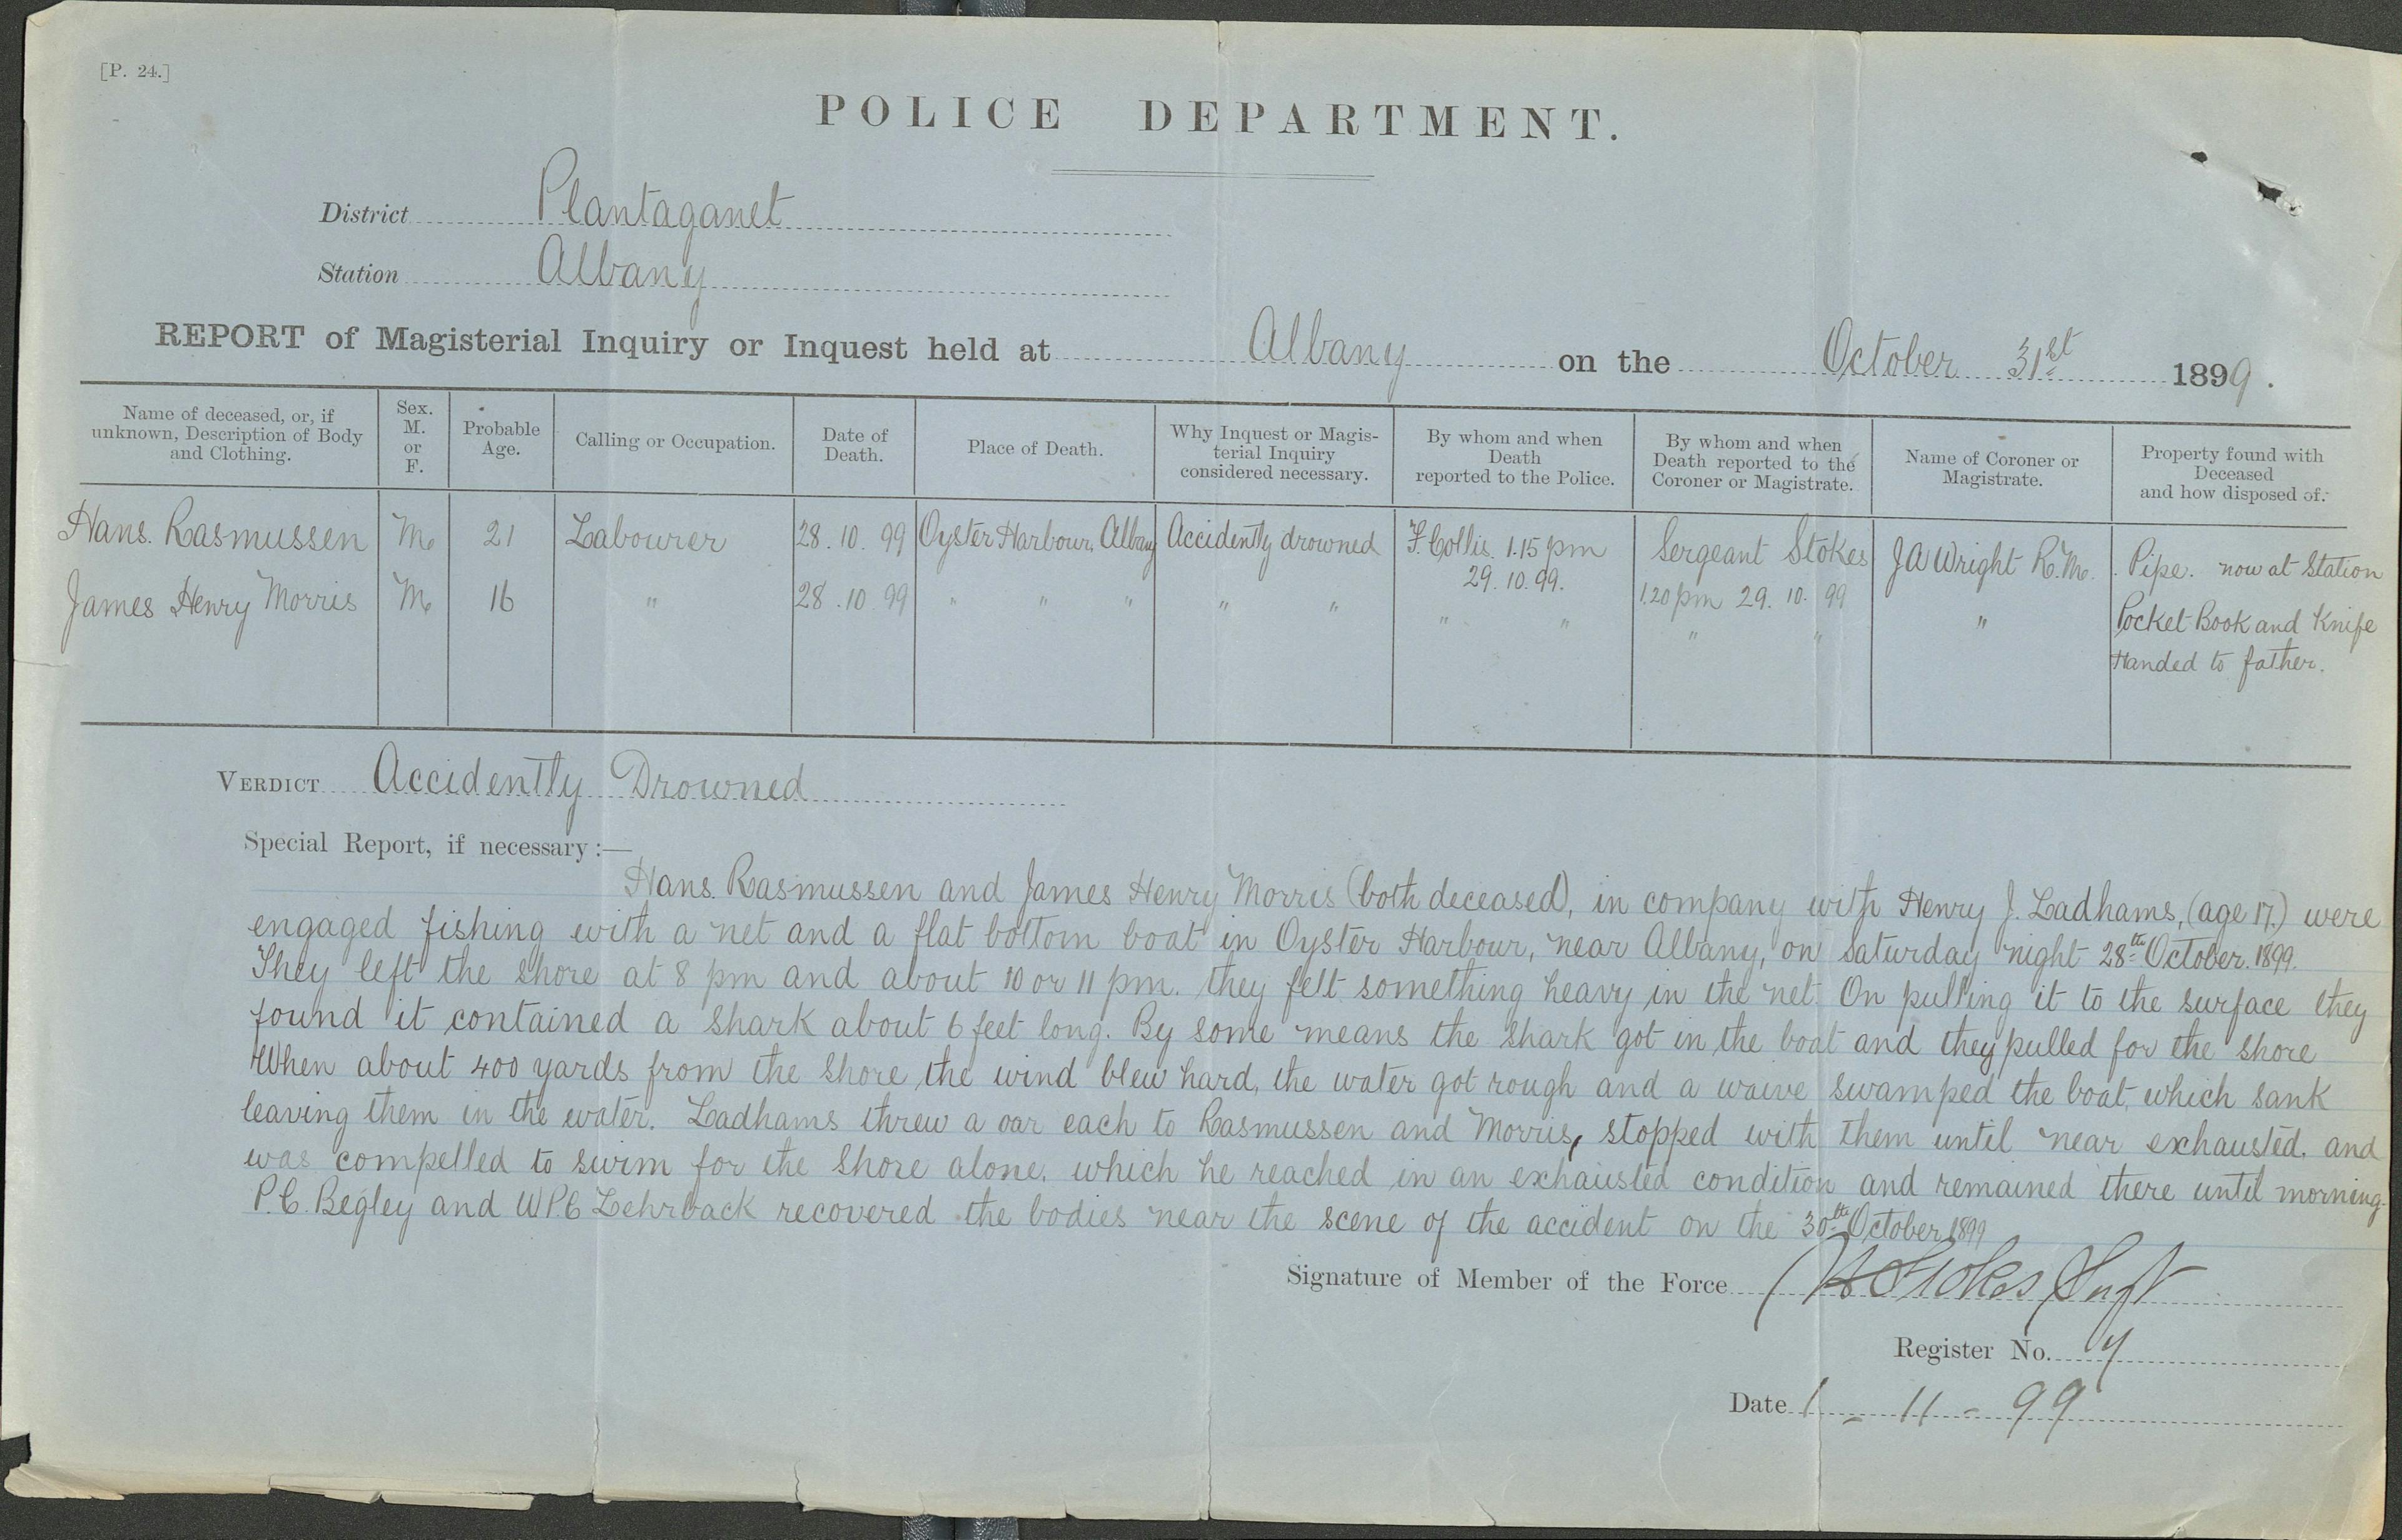 A copy of the Police Report into the tragedy